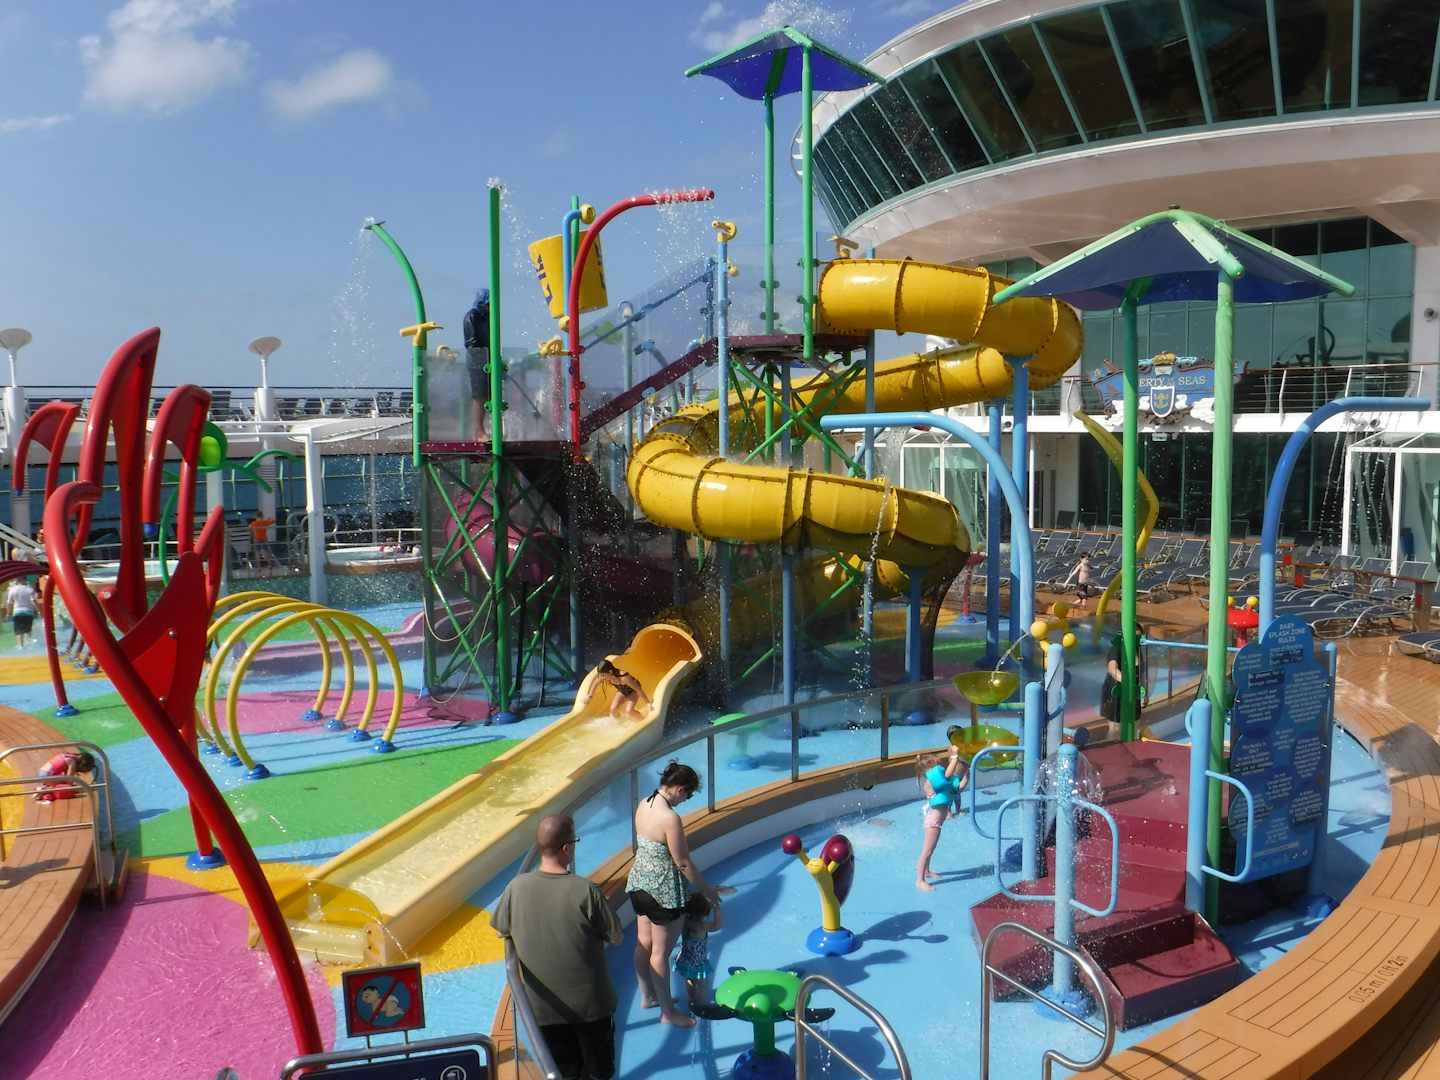 This is Splay Away Bay water play area for the smaller kids.